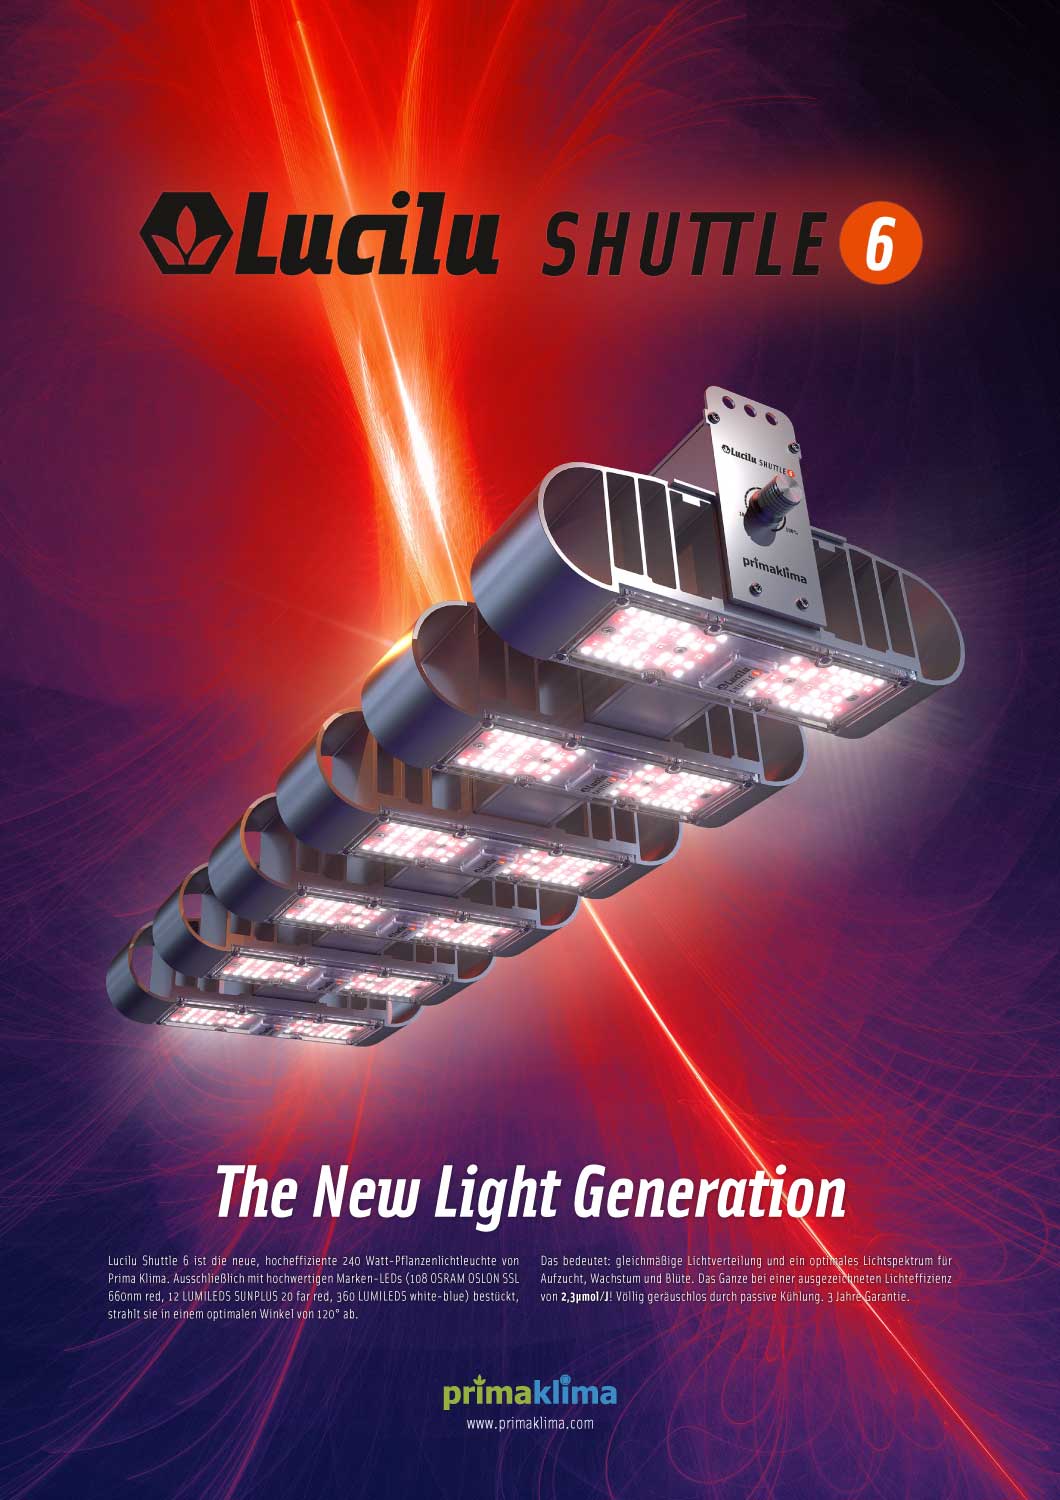 image of lucilu shuttle6 poster